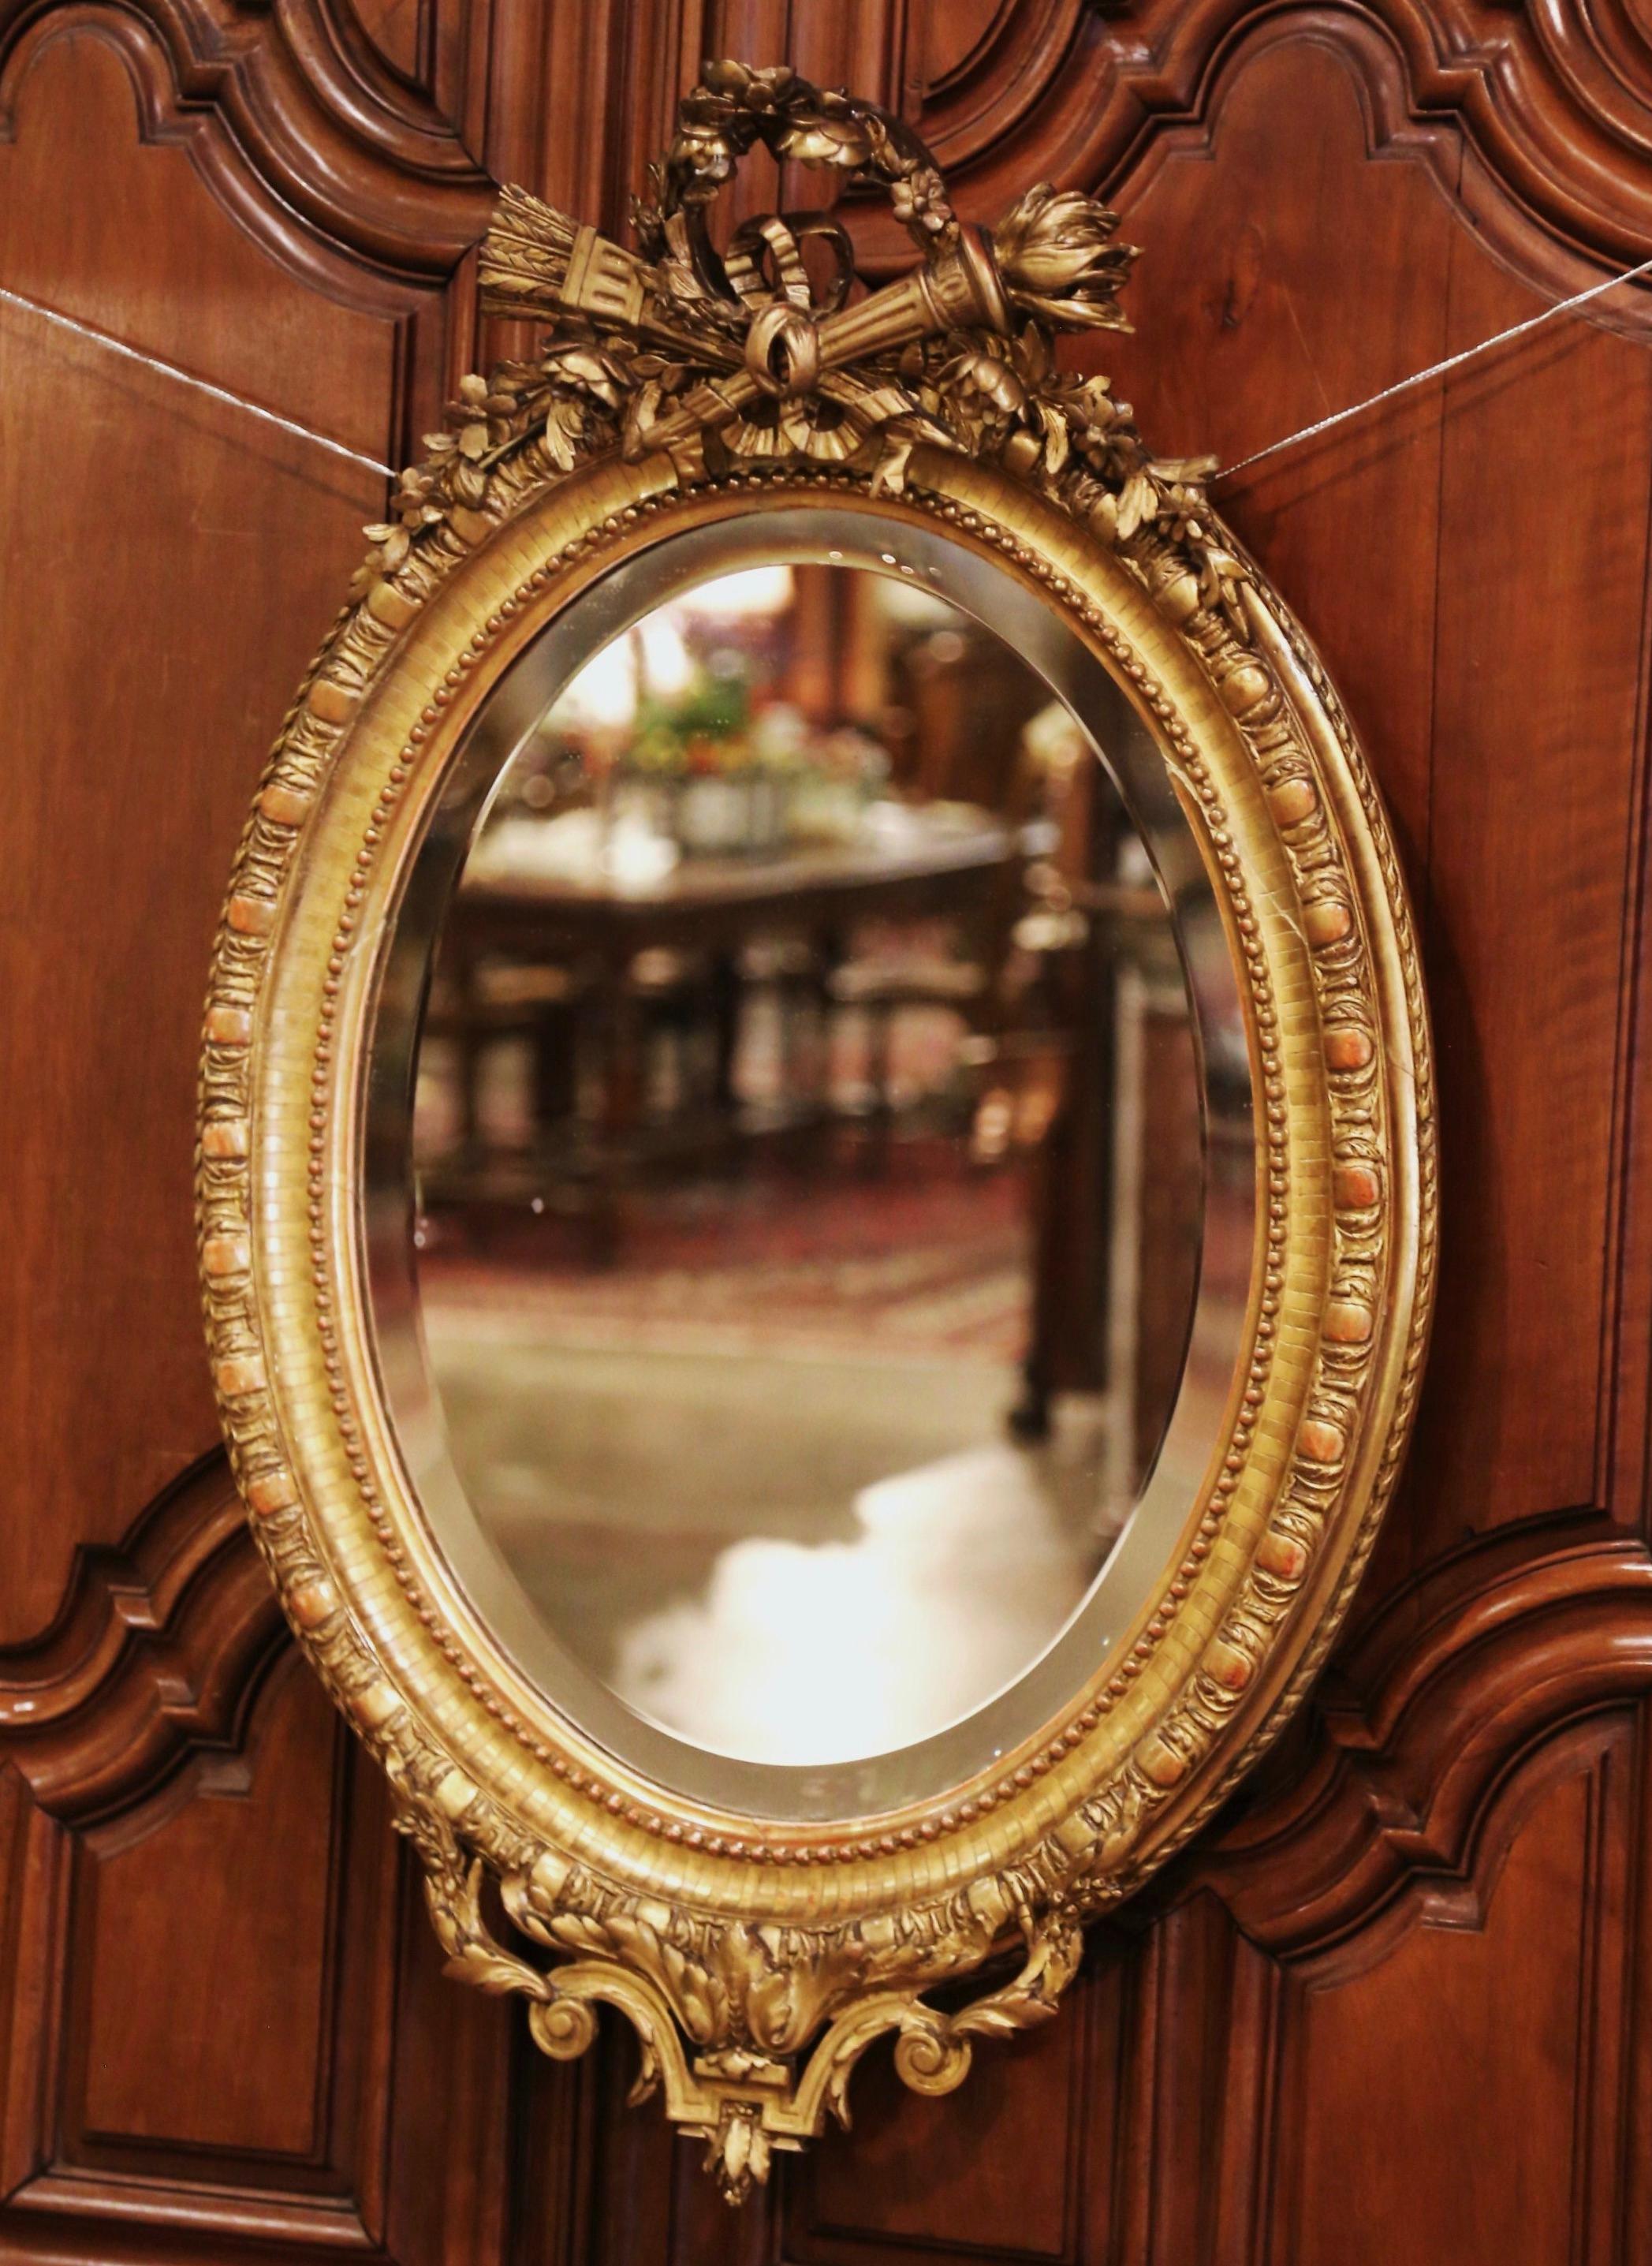 Decorate a powder room or entryway with this elegant antique wall mirror. Crafted in France, circa 1860, the beaded oval frame is decorated with floral motifs including torch decor and the traditional Louis XVI ribbon bow at the pediment, and